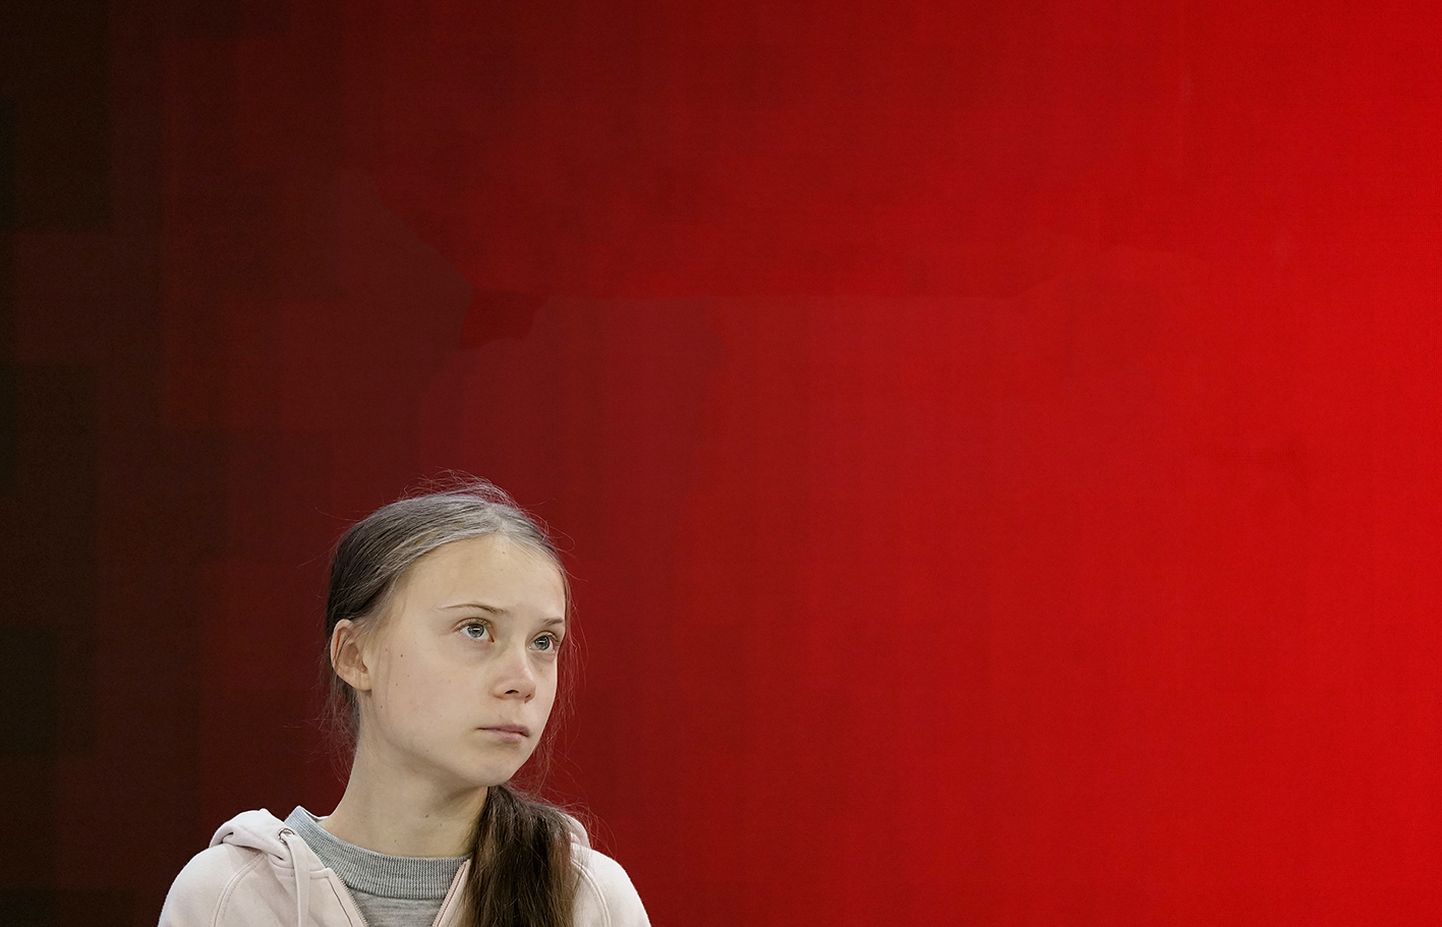 Swedish climate change activist Greta Thunberg attends a session at the 50th World Economic Forum (WEF) annual meeting in Davos, Switzerland, January 21, 2020. REUTERS/Denis Balibouse